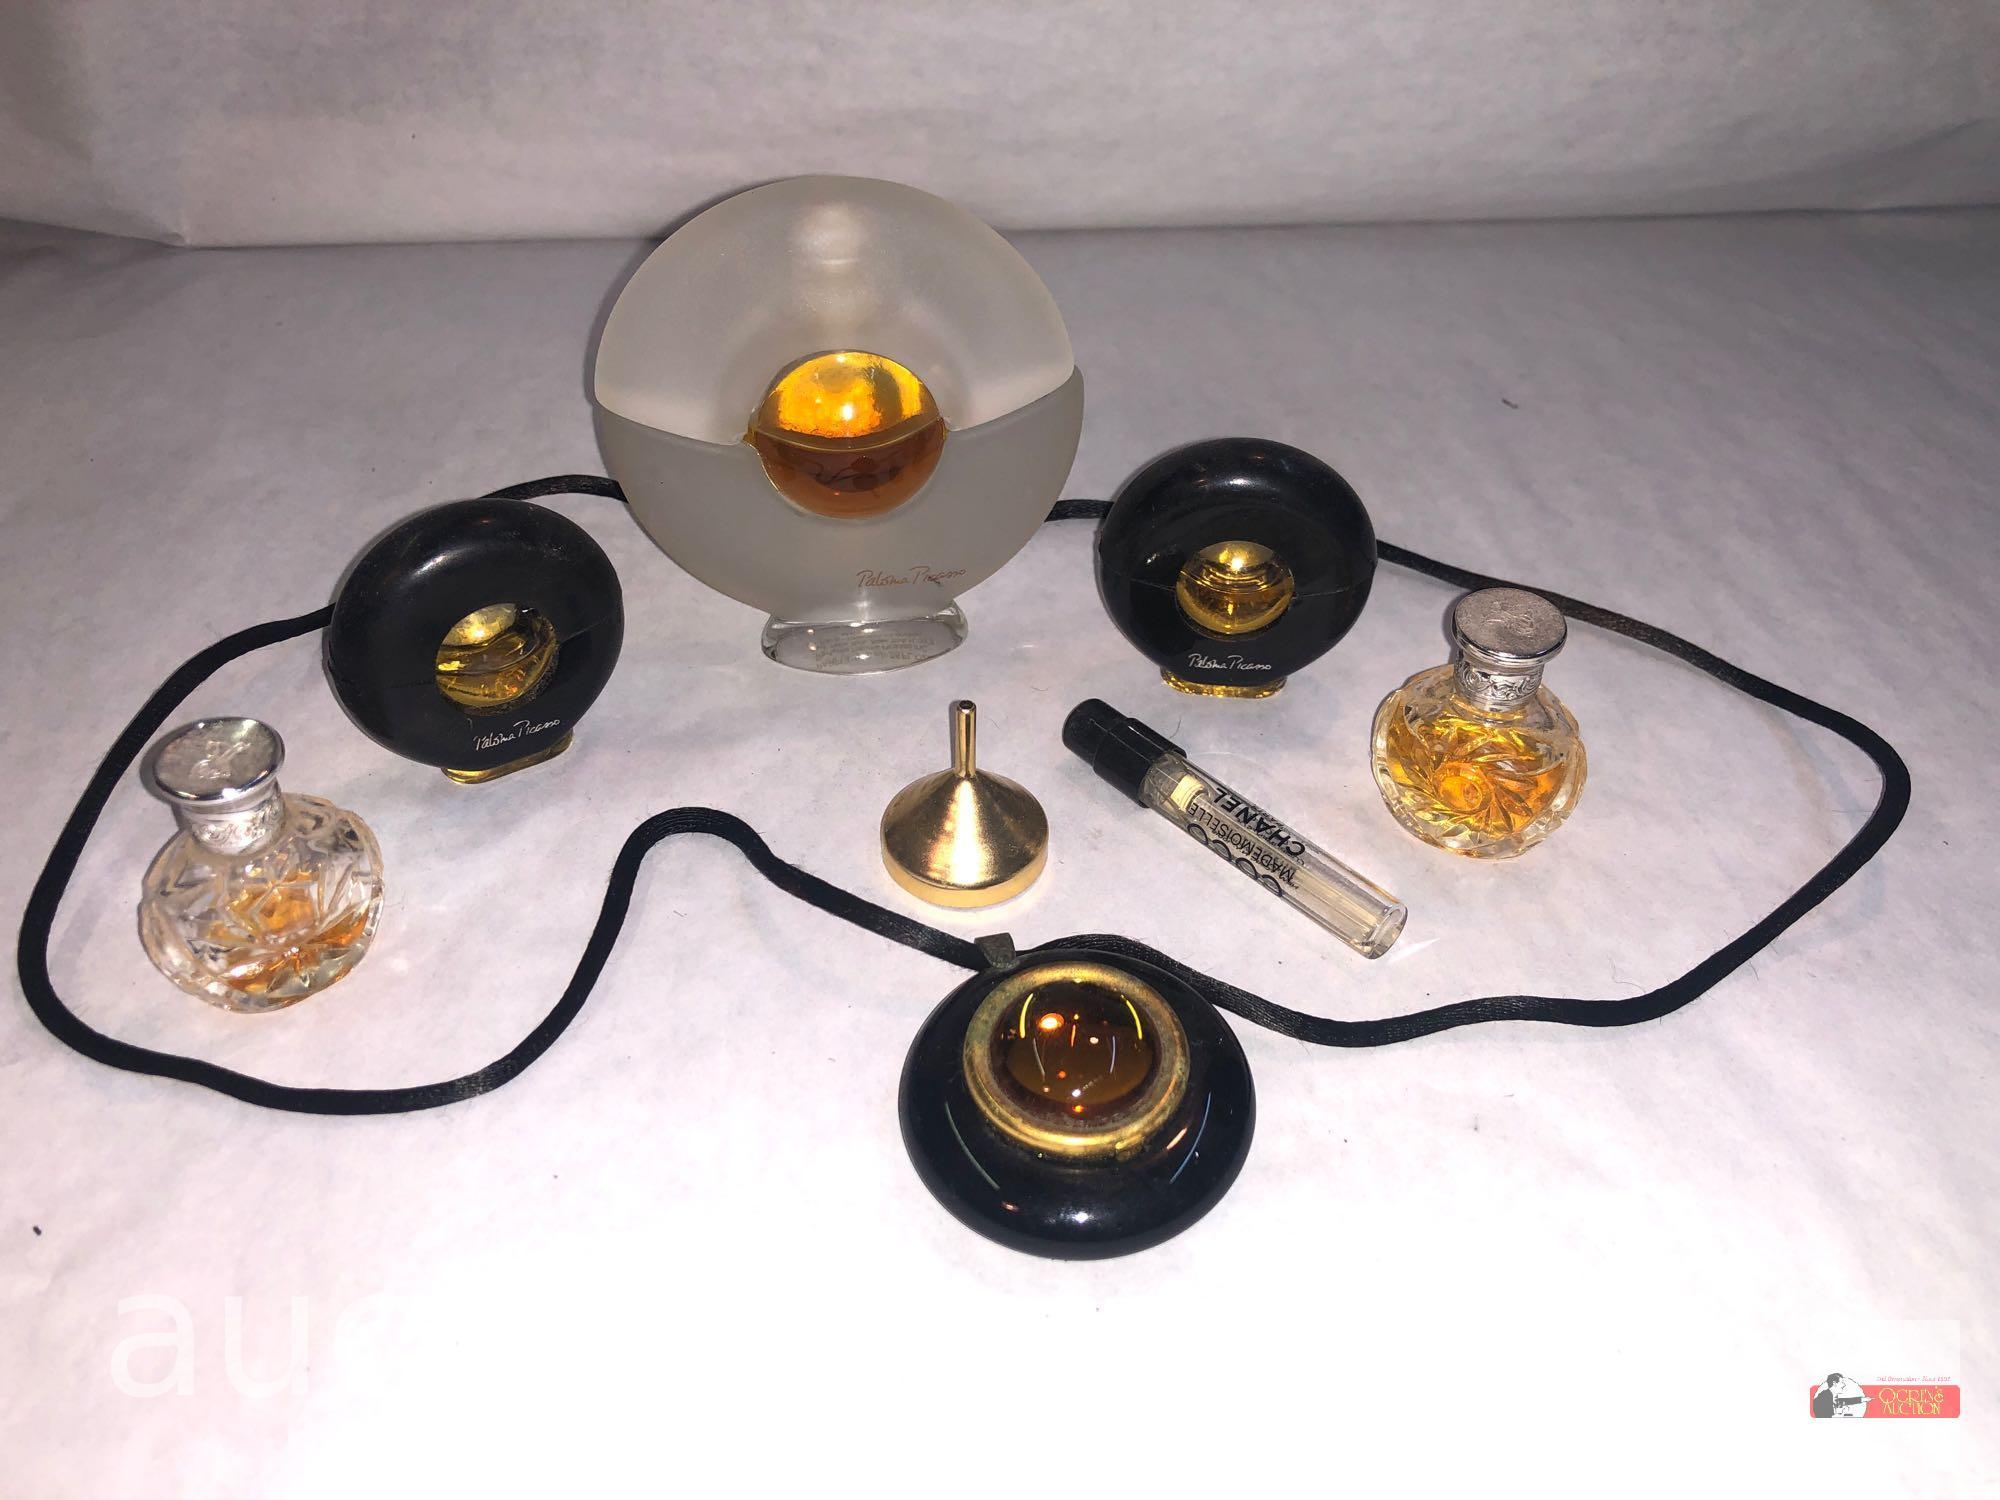 Perfumes - Mini bottles and necklace